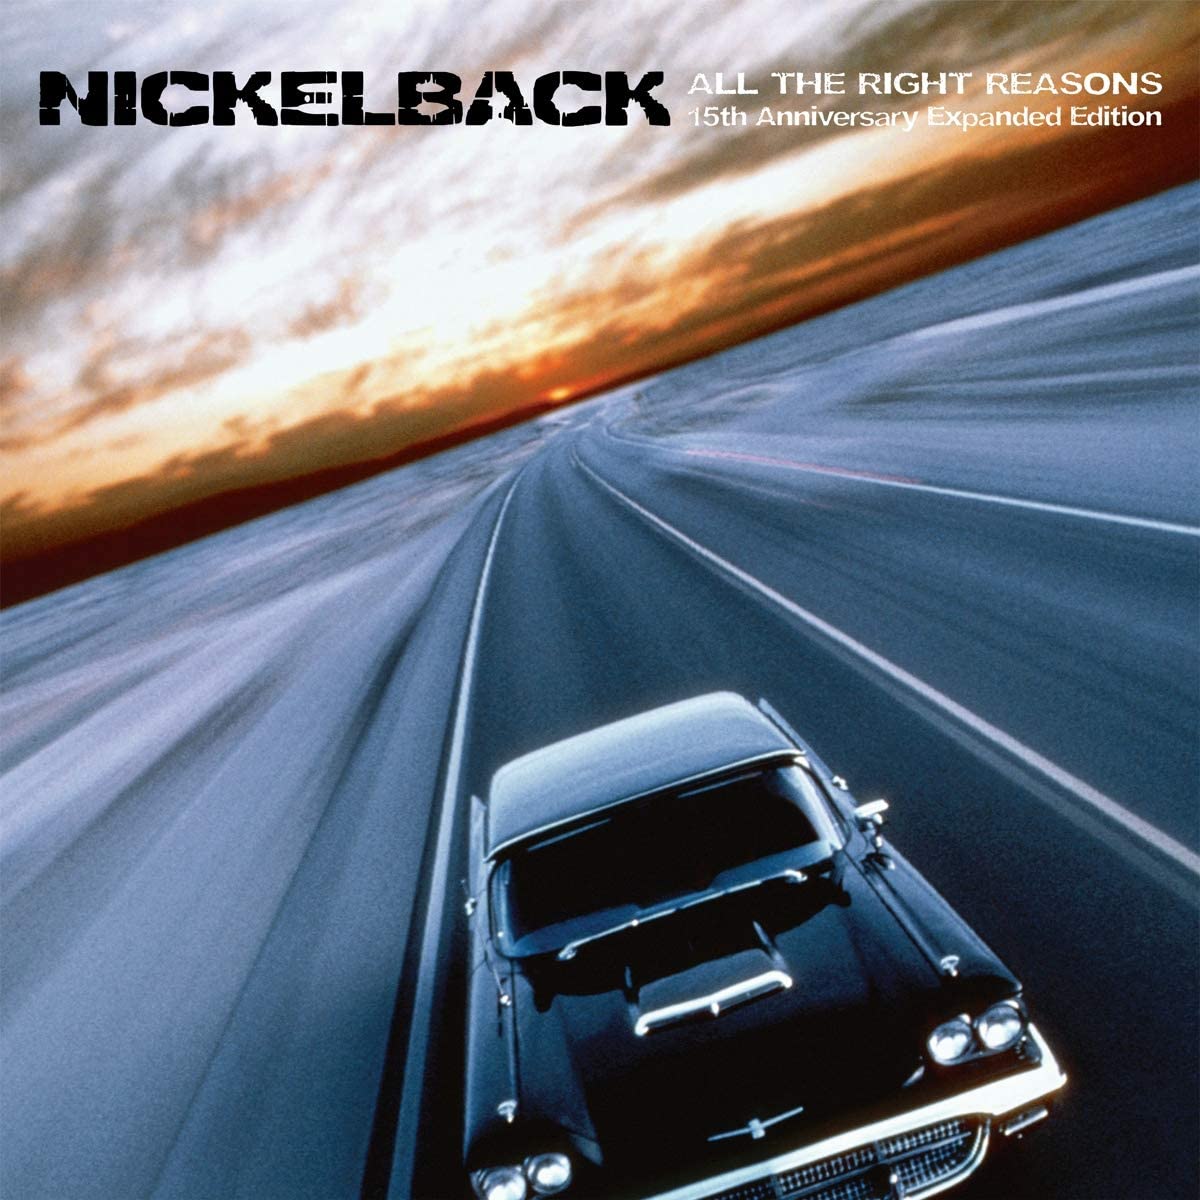 Nickelback – All The Right Reasons (15th Anniversary Expanded Edition) (2005/2020) [Official Digital Download 24bit/44,1kHz]